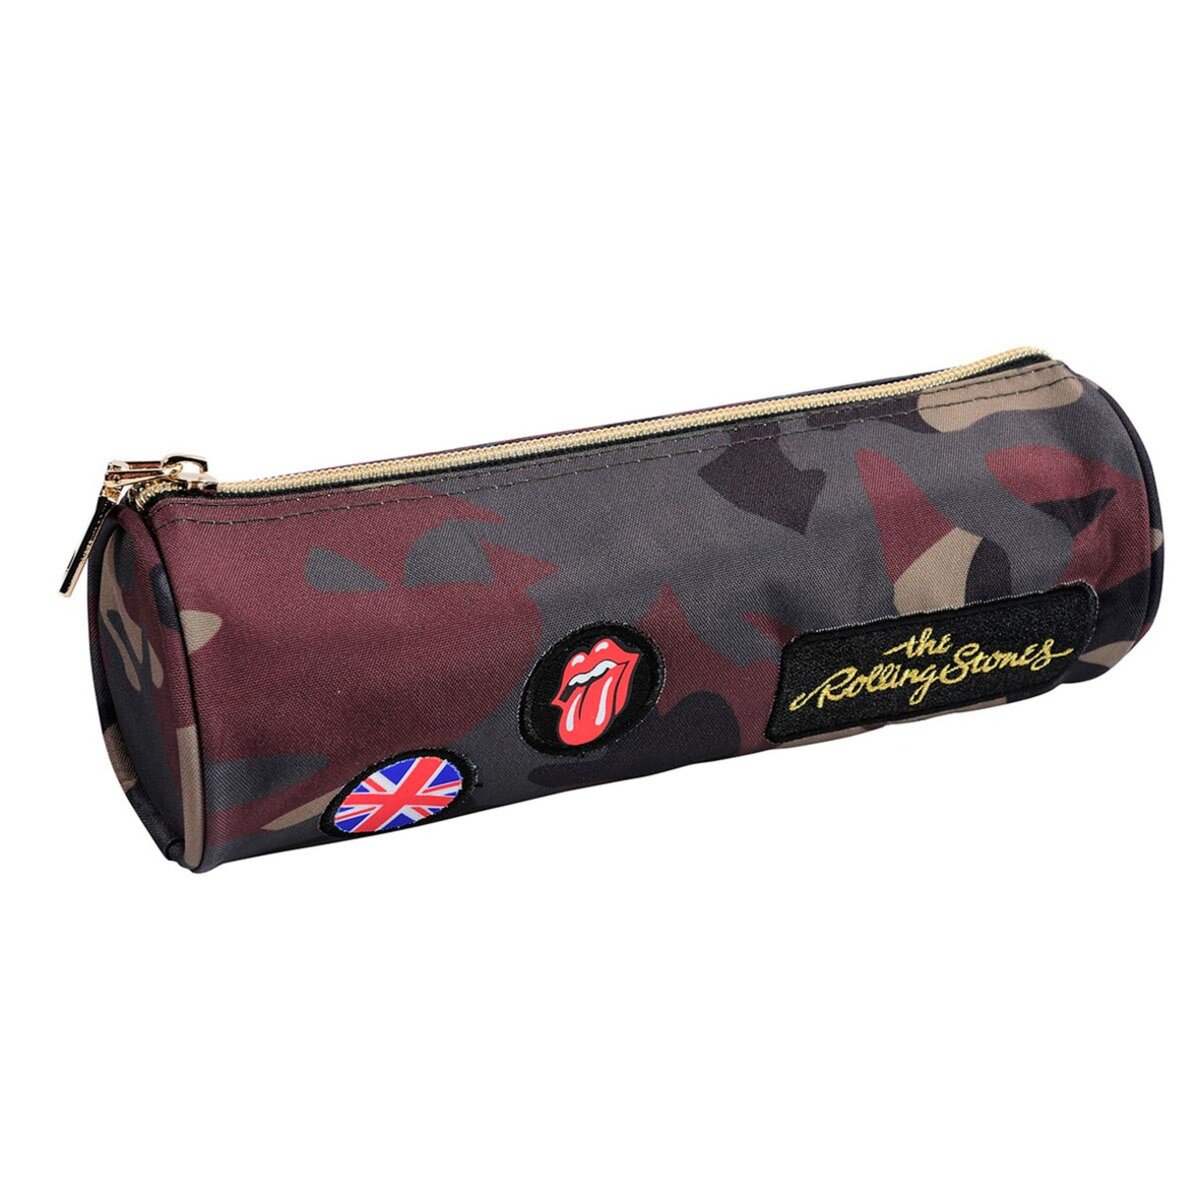  Trousse ronde fille The Rolling Stones camouflage